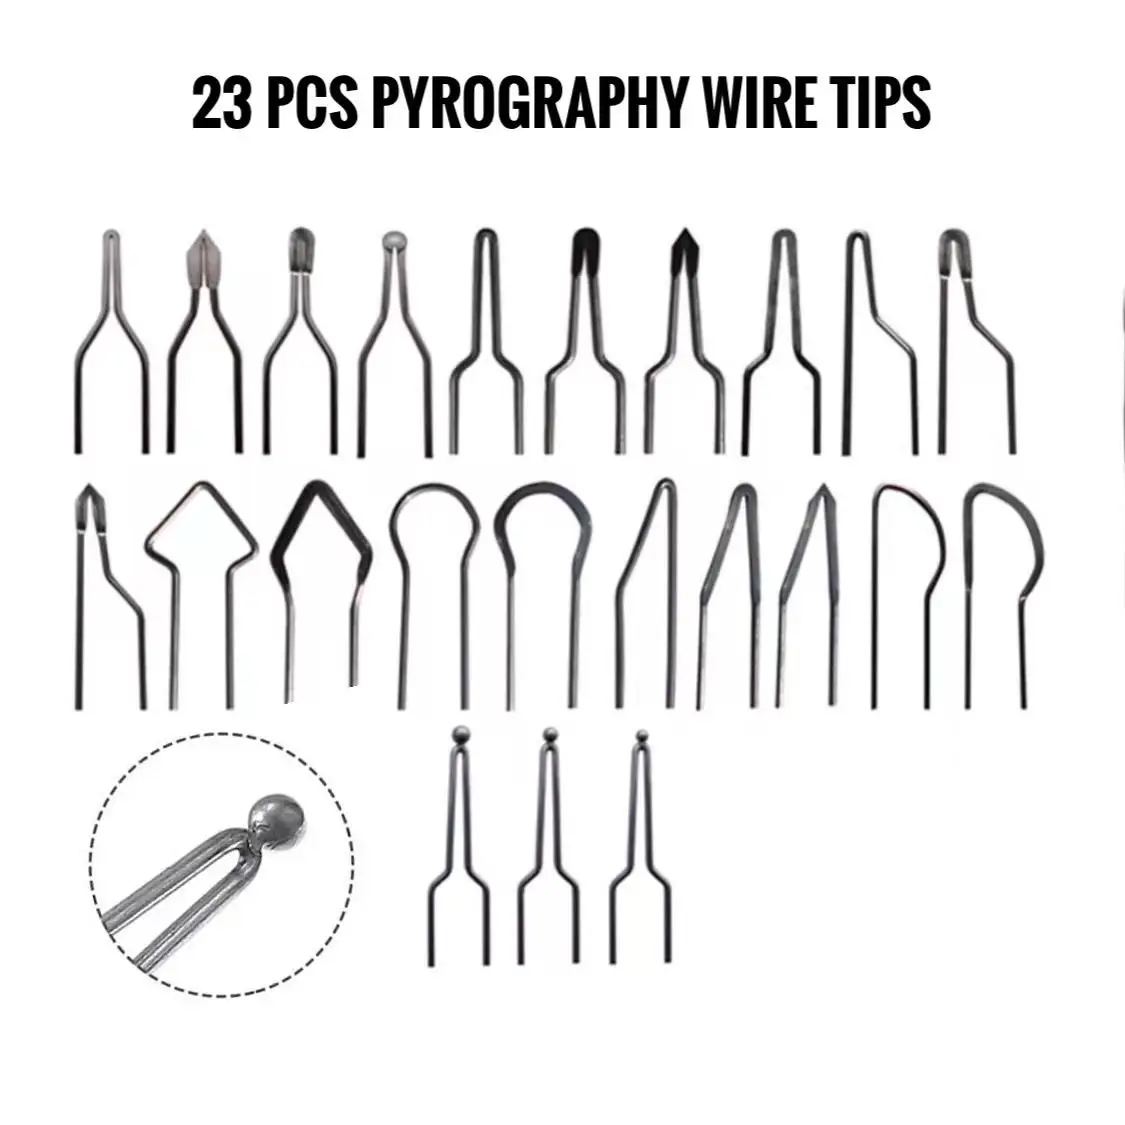 23Pcs/Set Pyrography Wire Tips Nickel Chromium Alloy Wood Burner Pyrography Pen Adjustable Temperature Pyrography Machine Parts wp 9 wp9 ly 200r swivel rotary spin air cooled gz1 4 thread tig torch head burner hose argon welding machine accessory